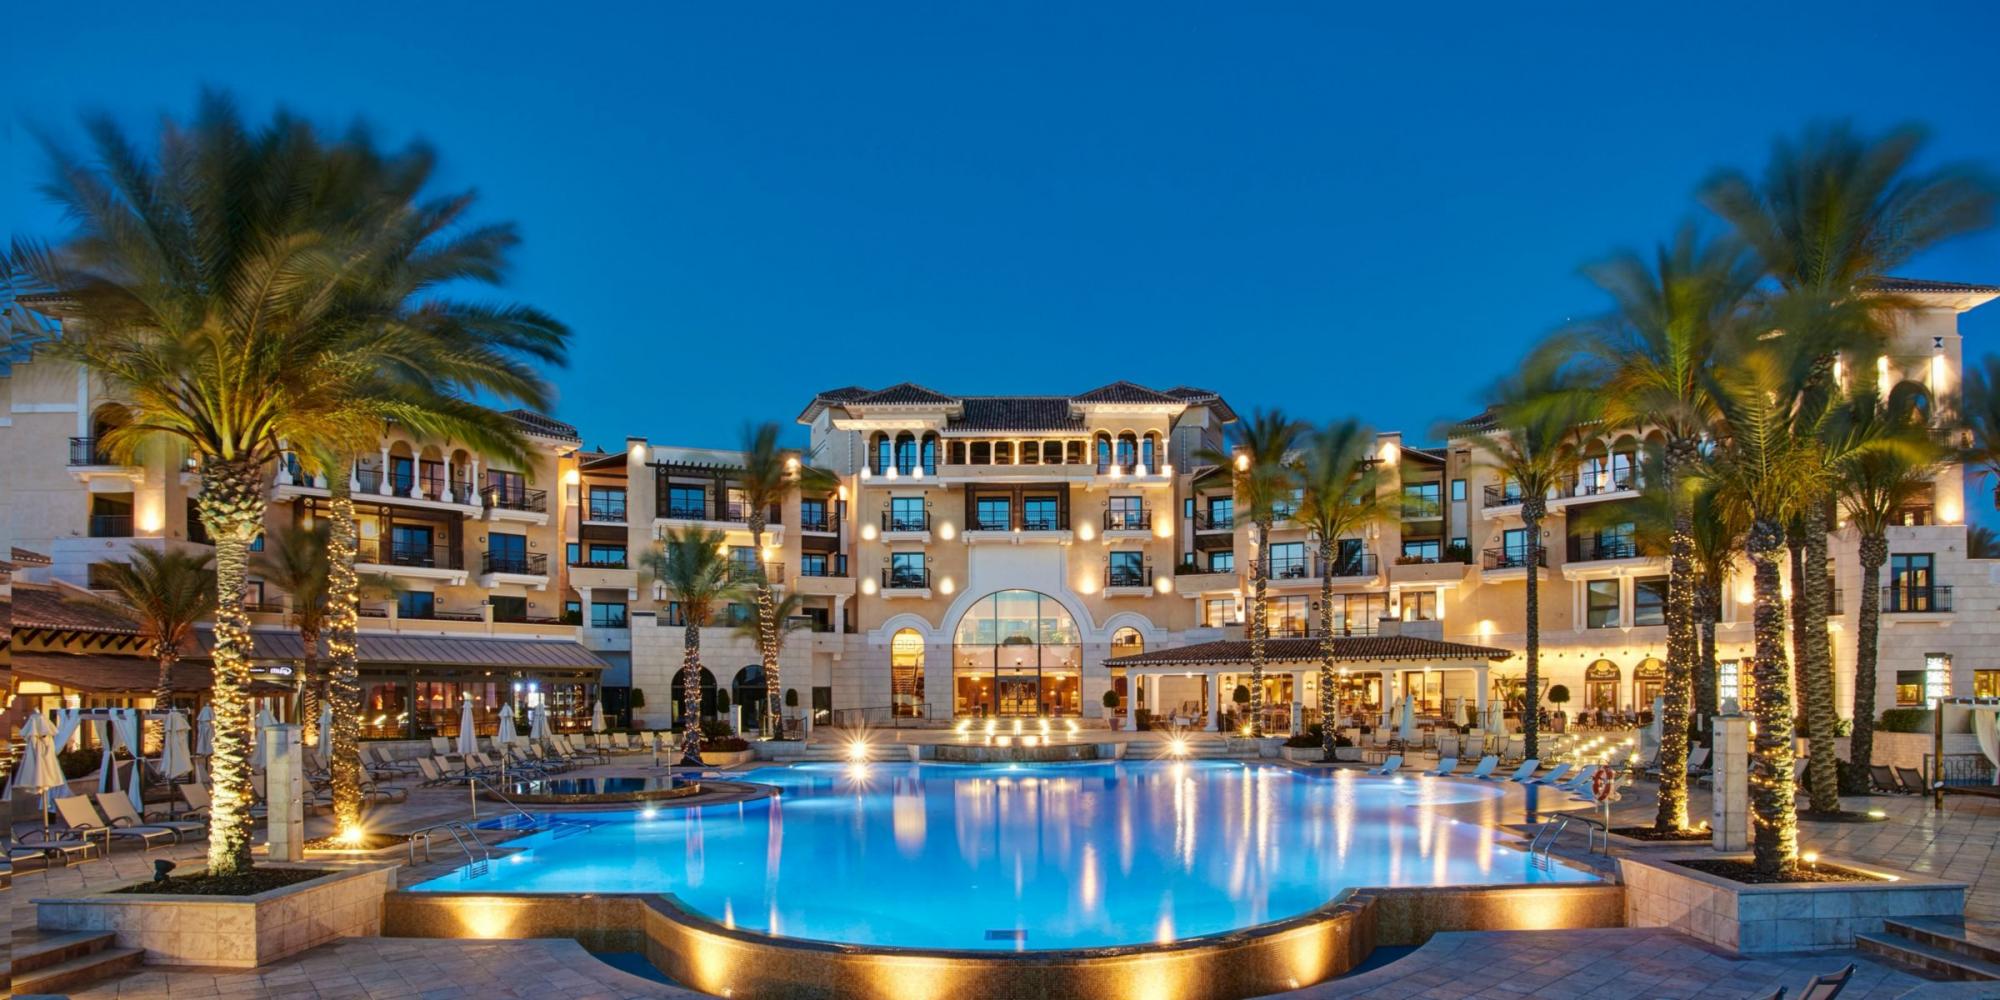 View InterContinental Mar Menor Golf Resort  Spa's lovely hotel situated in amazing Costa Blanca.